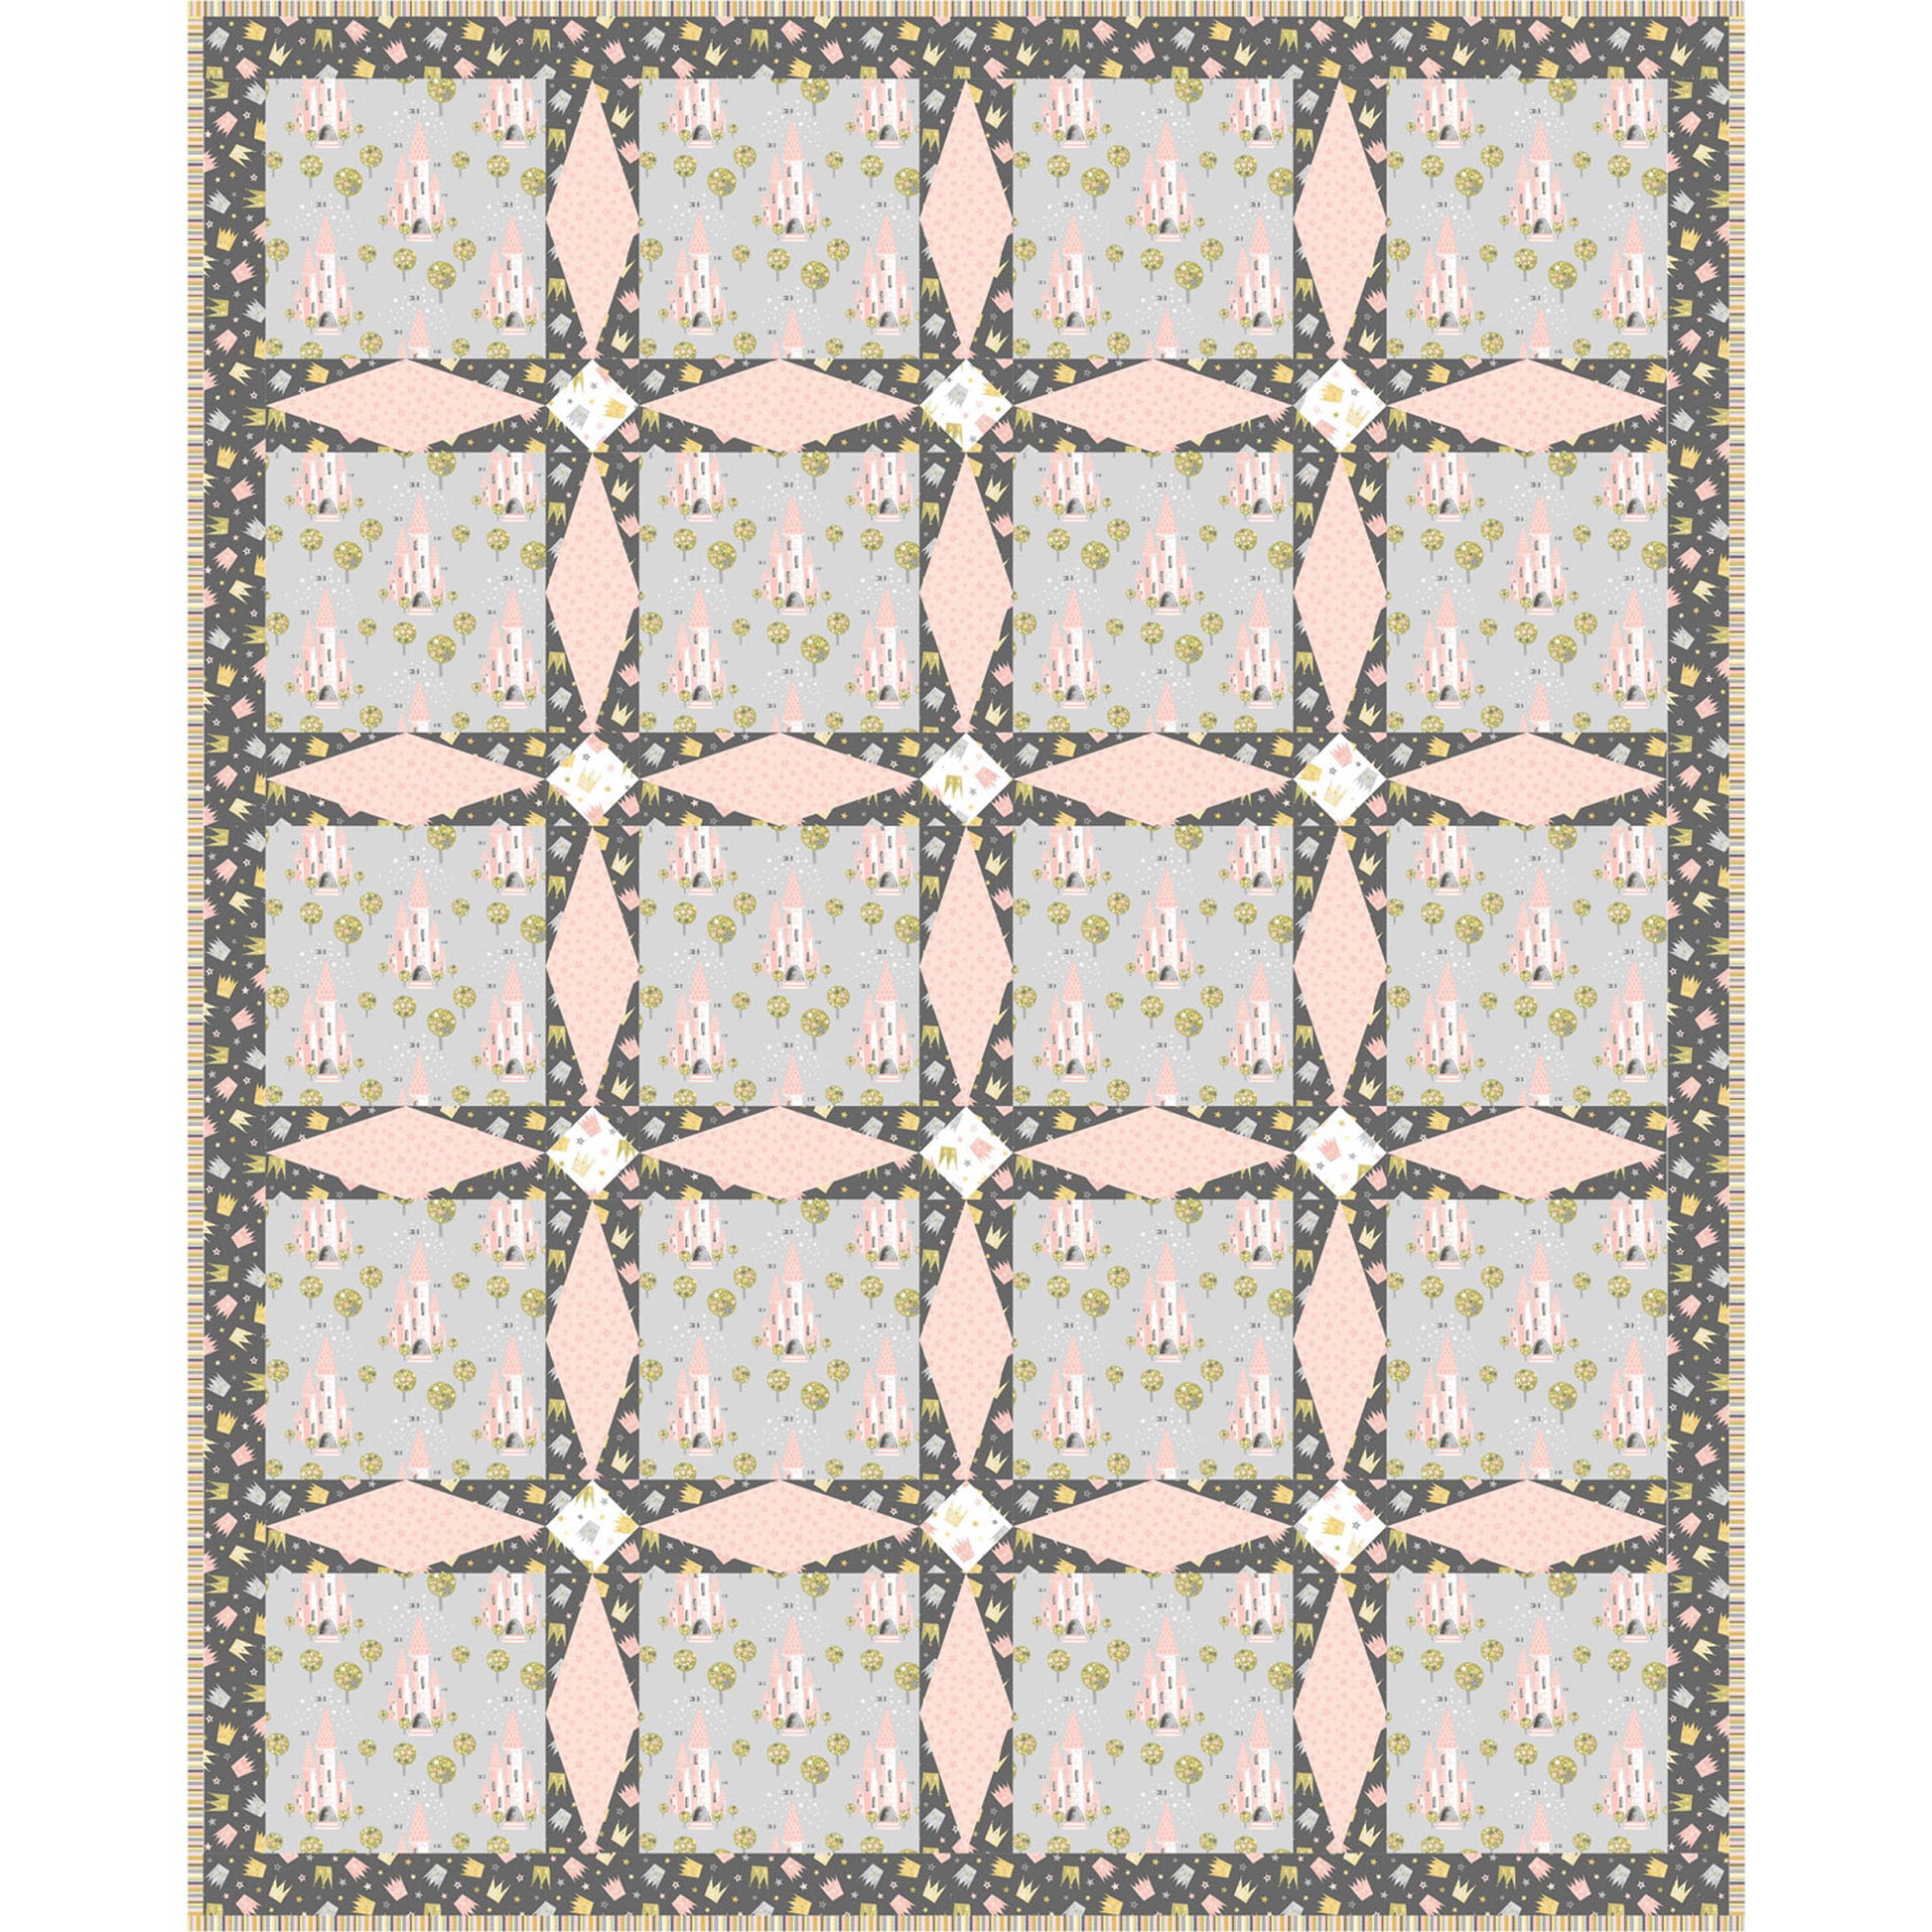 A quilt with alternating pink and gray squares, showcasing a beautiful blend of colors and patterns.